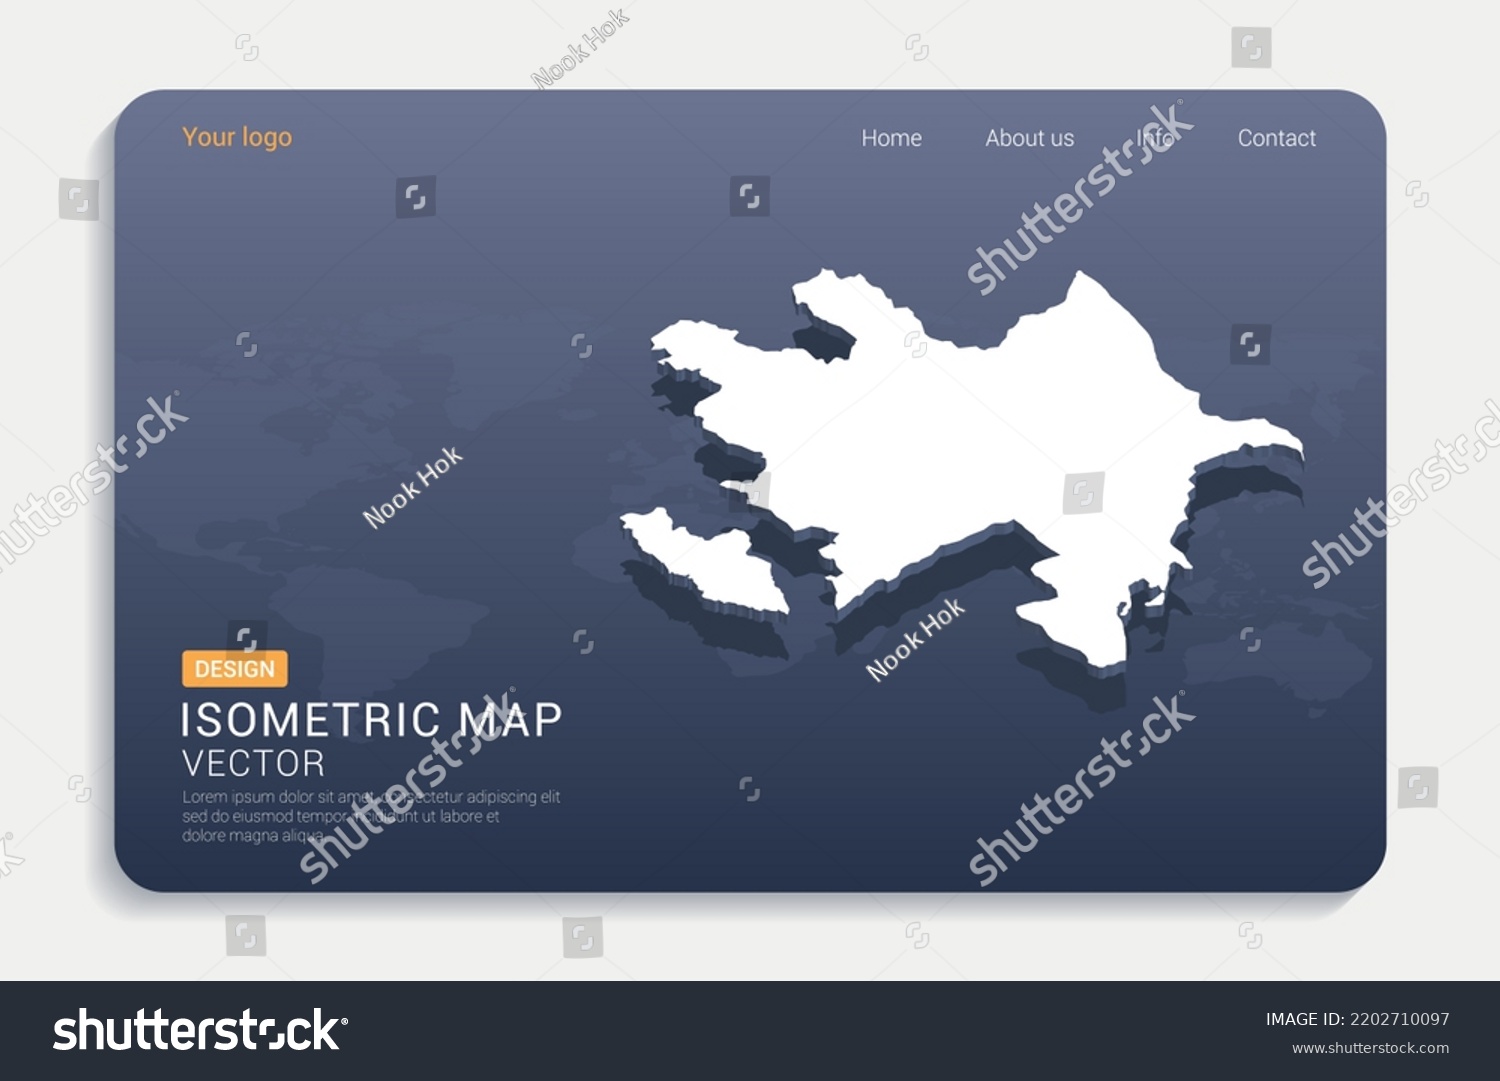 SVG of Azerbaijan map white on blue background with isometric vector. svg